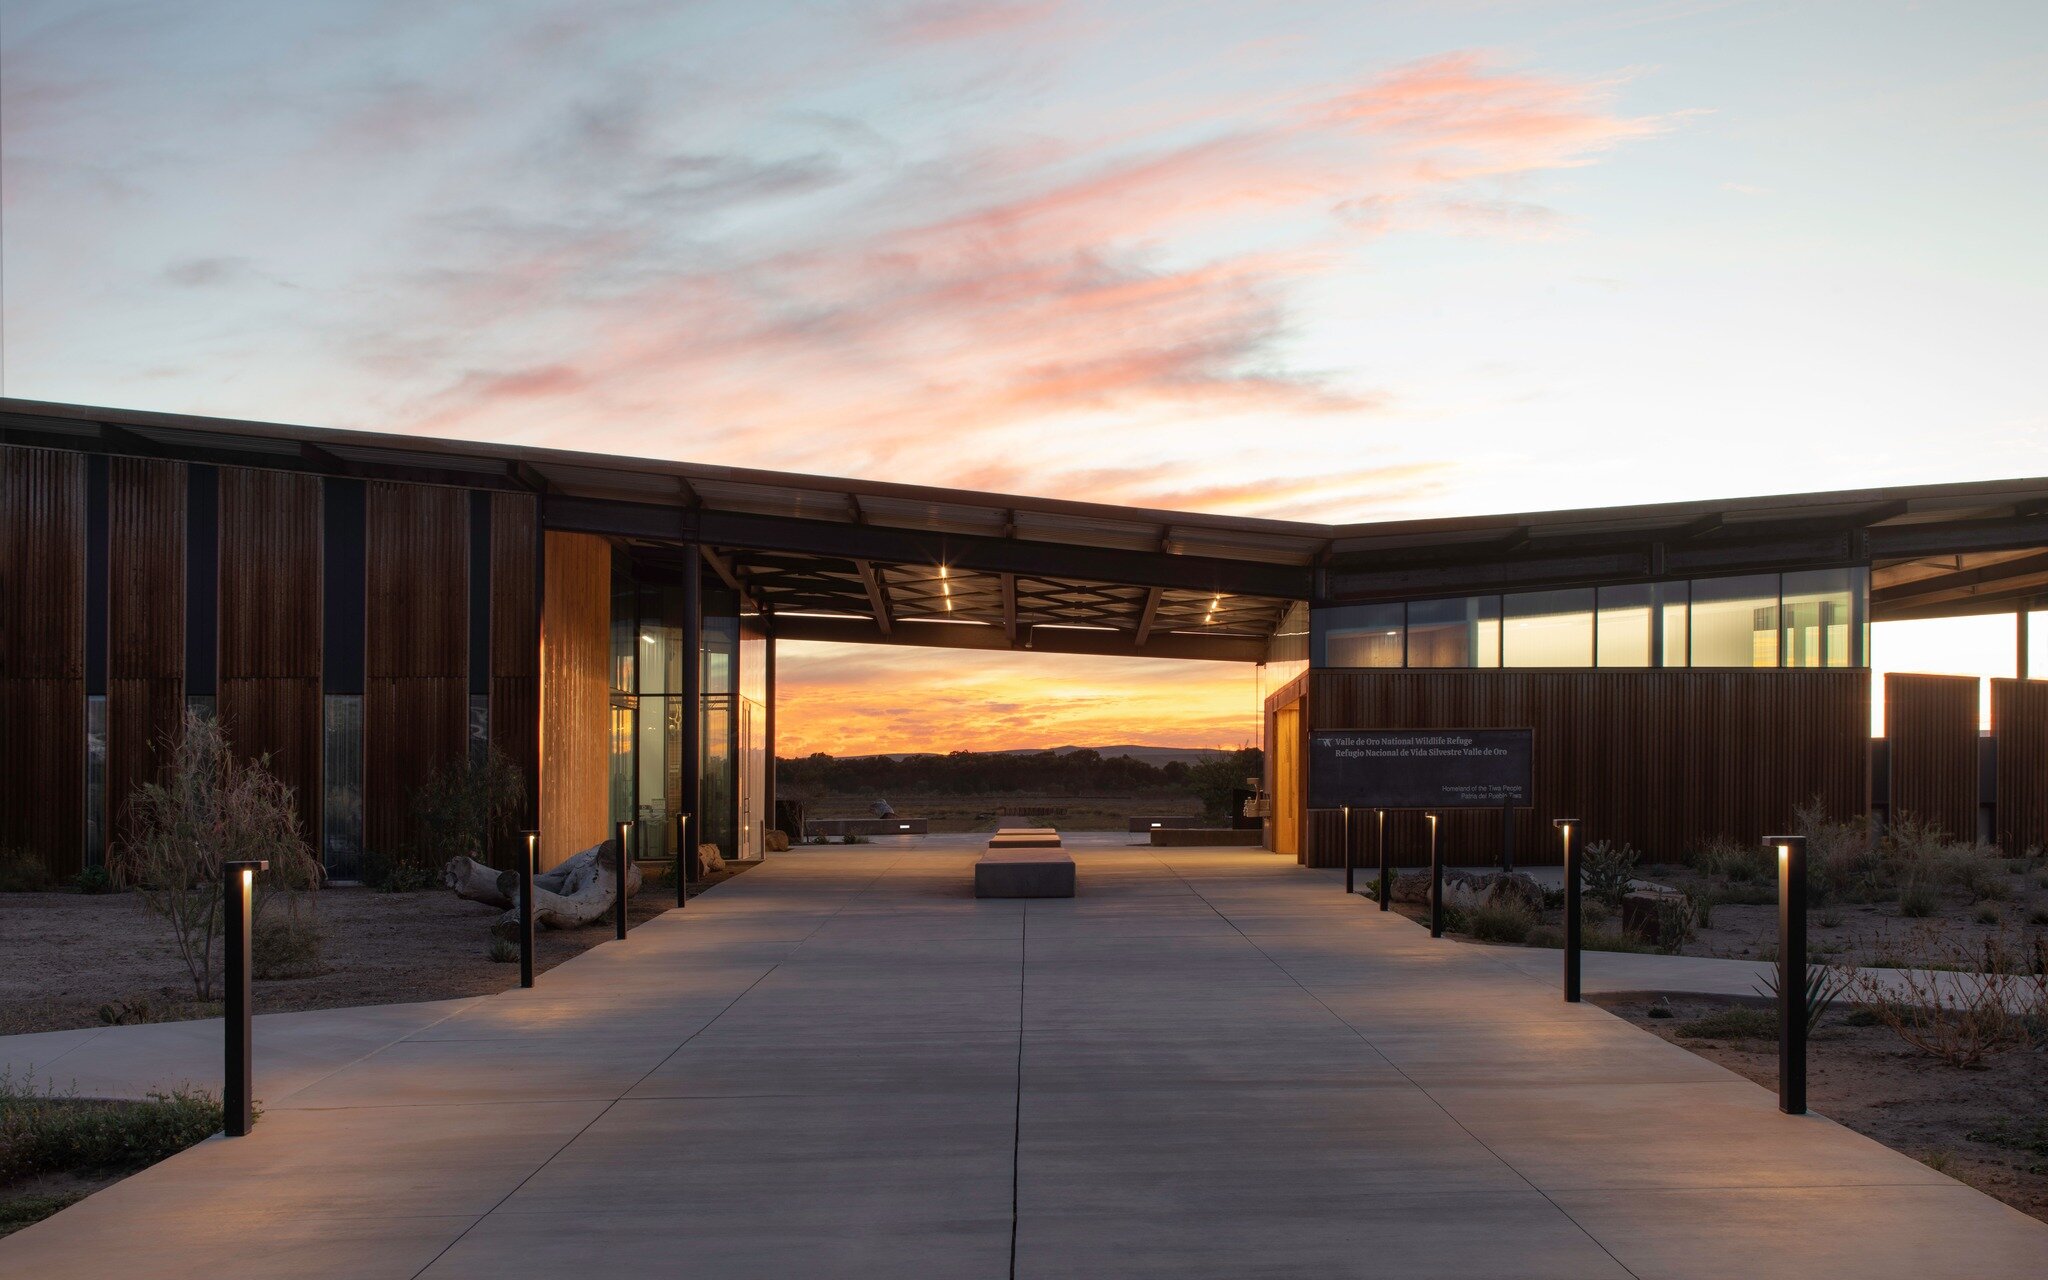 Valle de Oro has won the top award for contemporary architecture from the 2023 Jeff Harnar Awards! Surroundings lead both the landscape visioning during the design-build RFP, and the subsequent design of the external environs for the new Valle de Oro